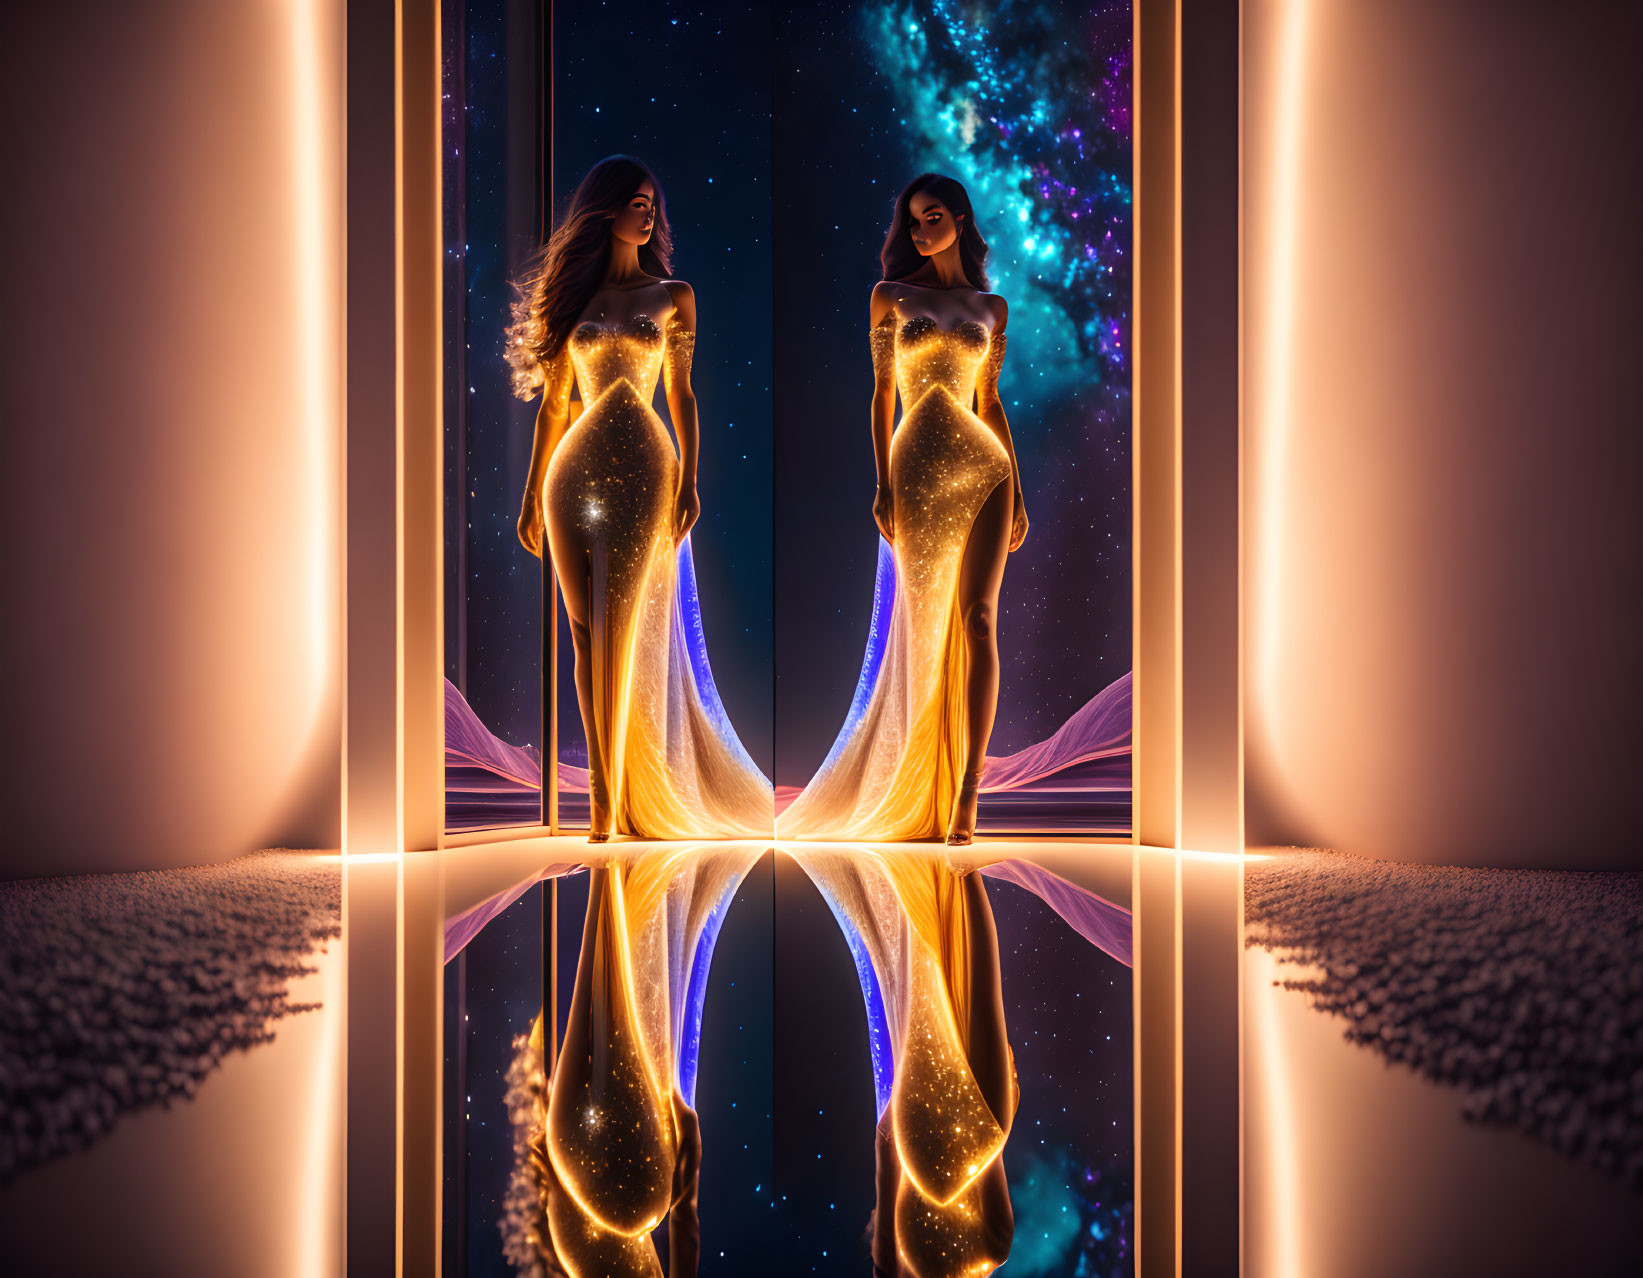 Symmetrical cosmic silhouettes with golden light reflection